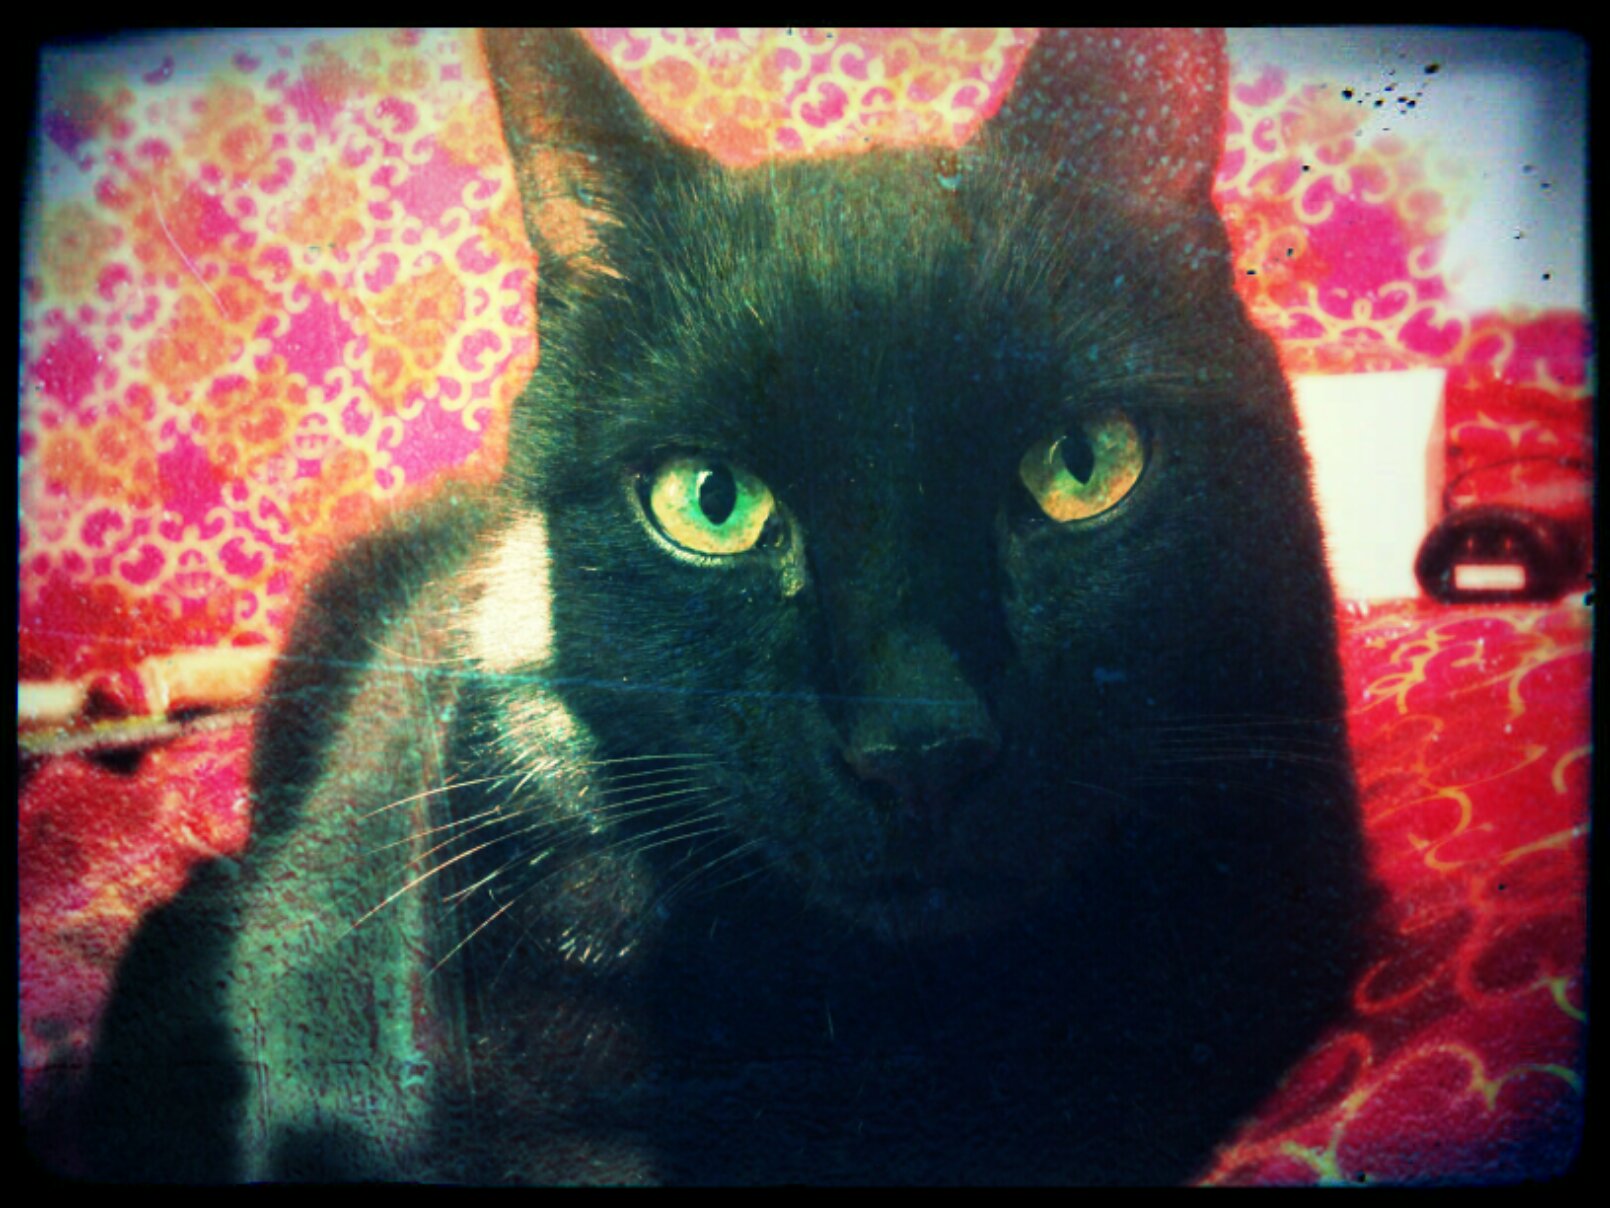 Midnight stares at me with intensity and possibly disdain.